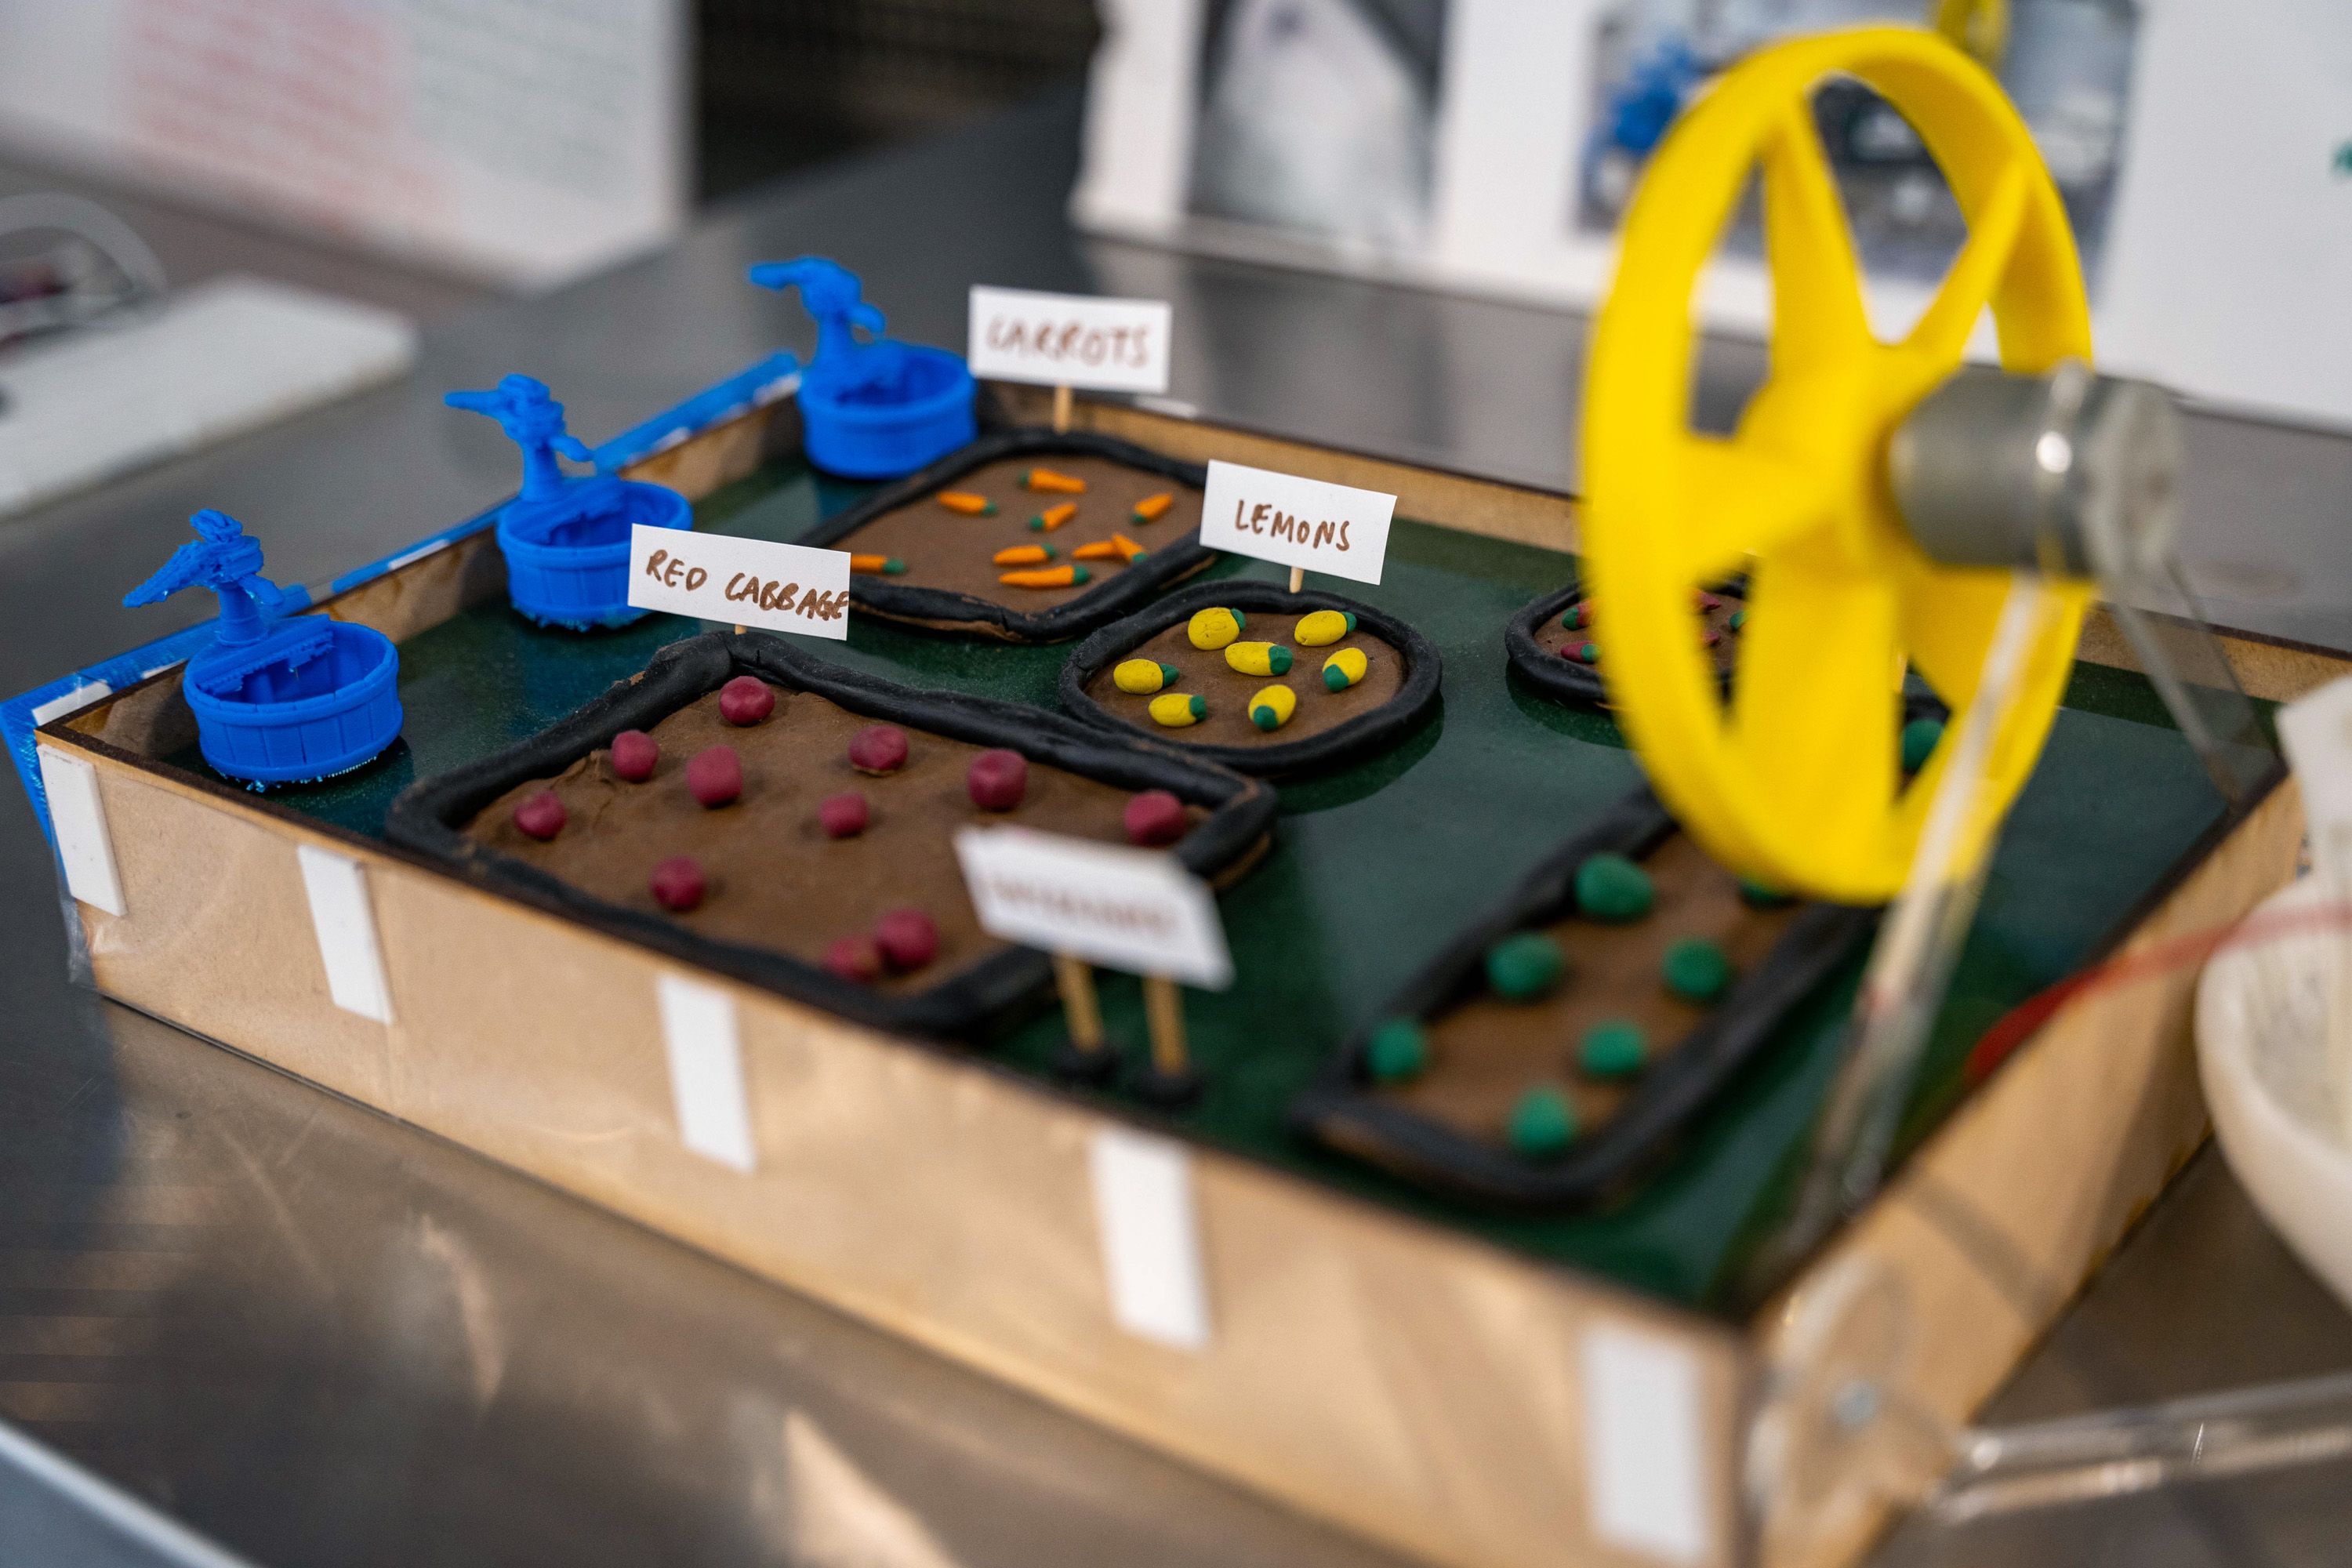 A close-up of a model of trays of fruit and vegetables, with a fan connected to a motor next to them